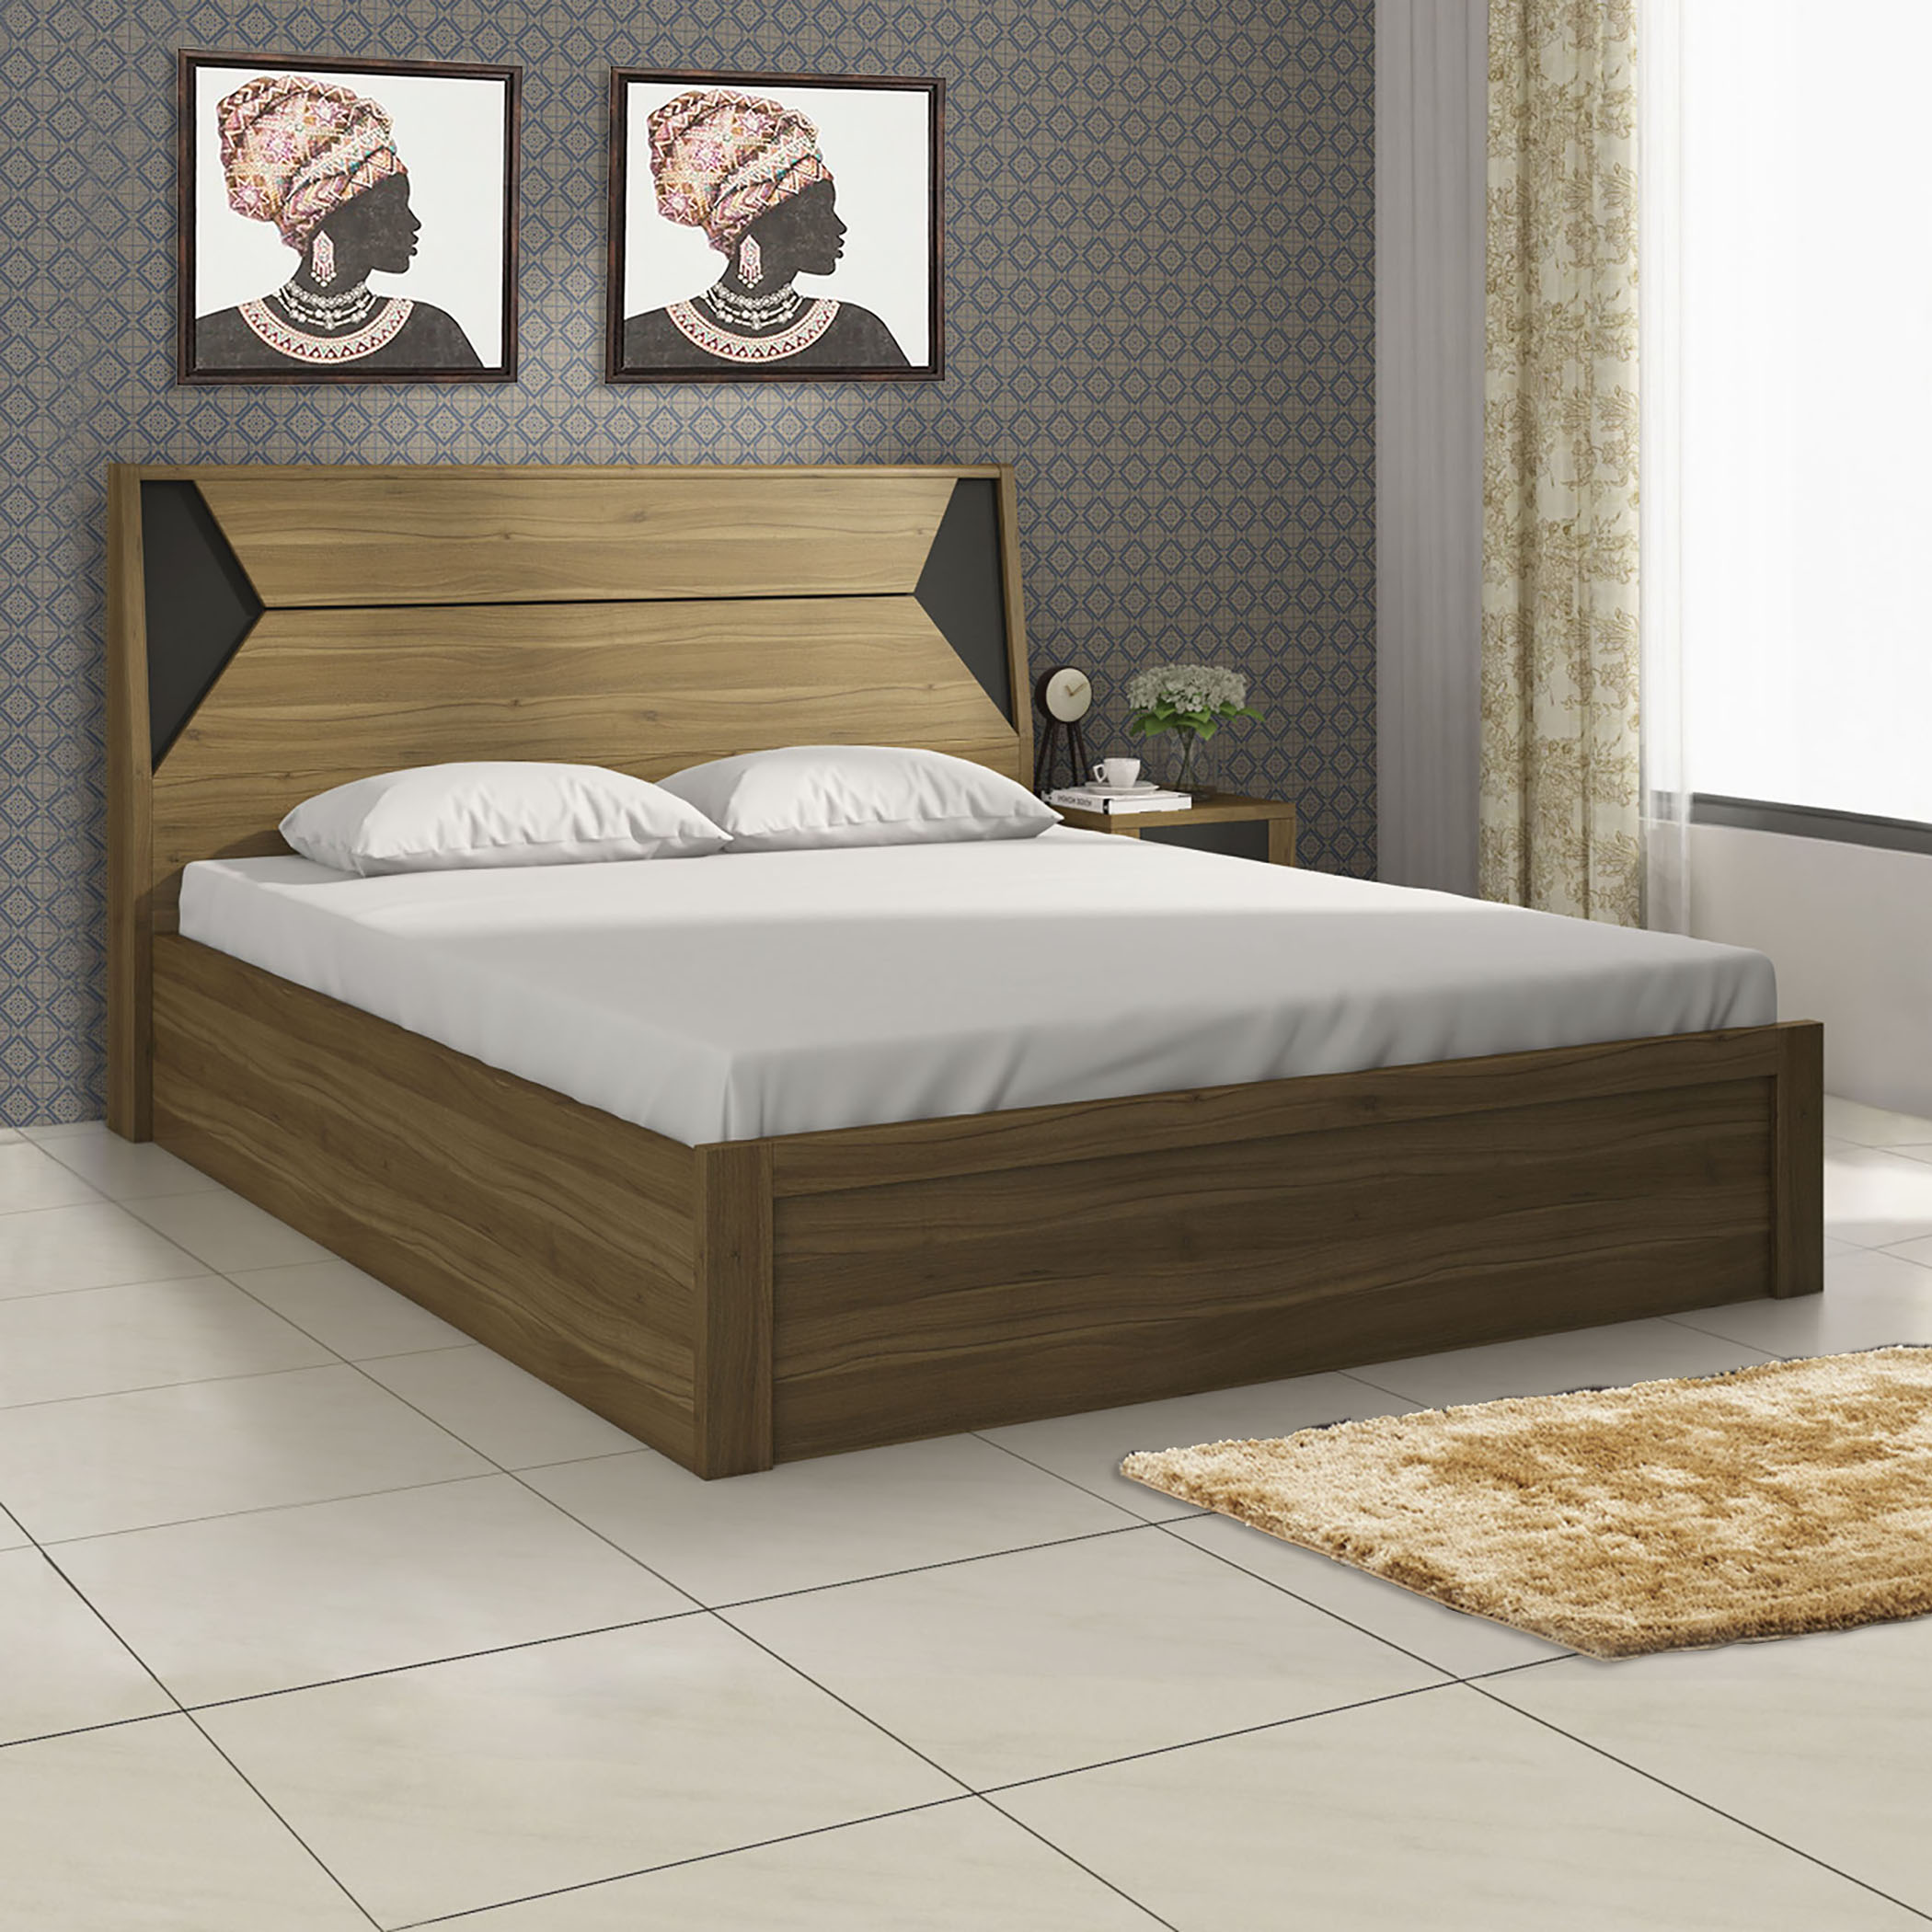 Quadro Edge King Bed with Hydraulic Storage - Brown